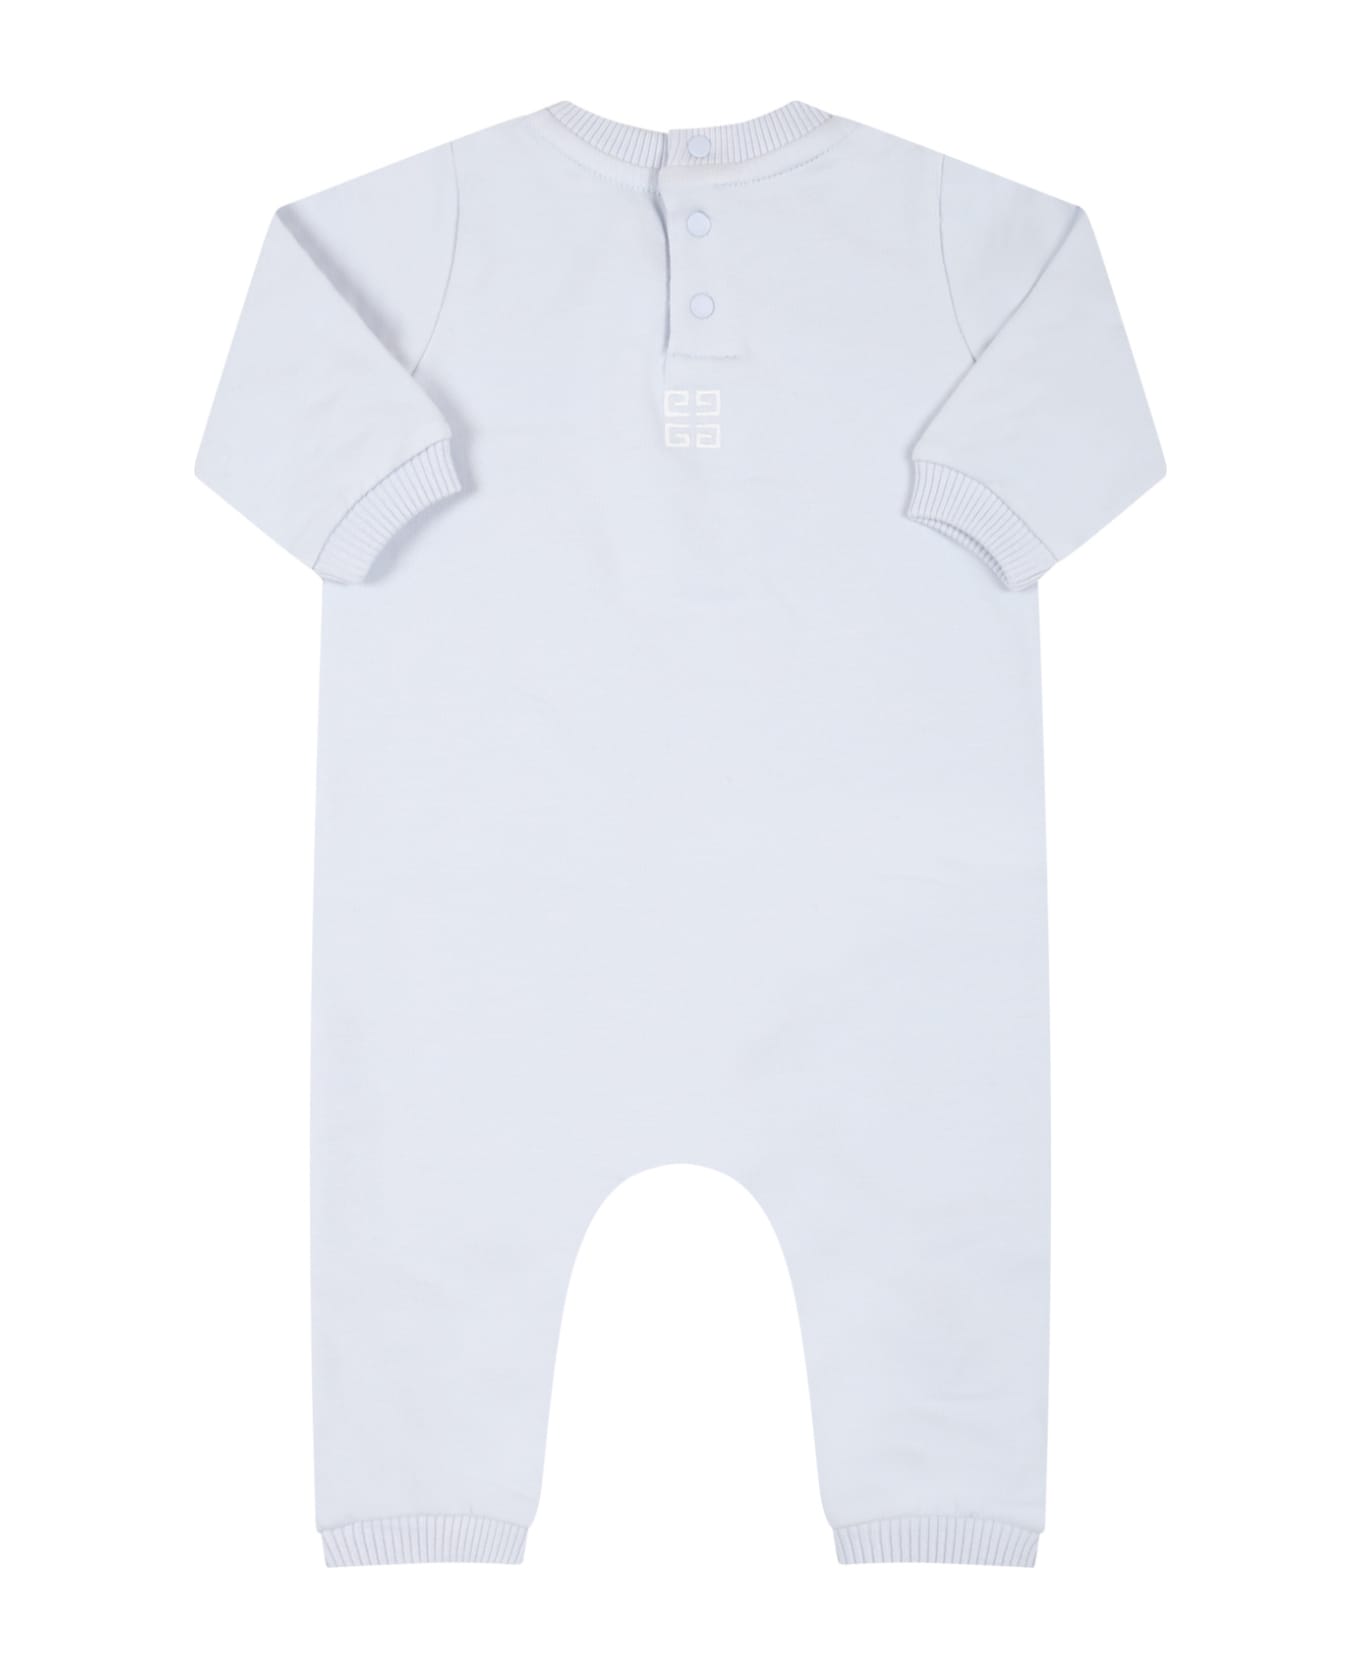 Givenchy Light Blue Babygrow For Baby Boy With Logo - Light Blue